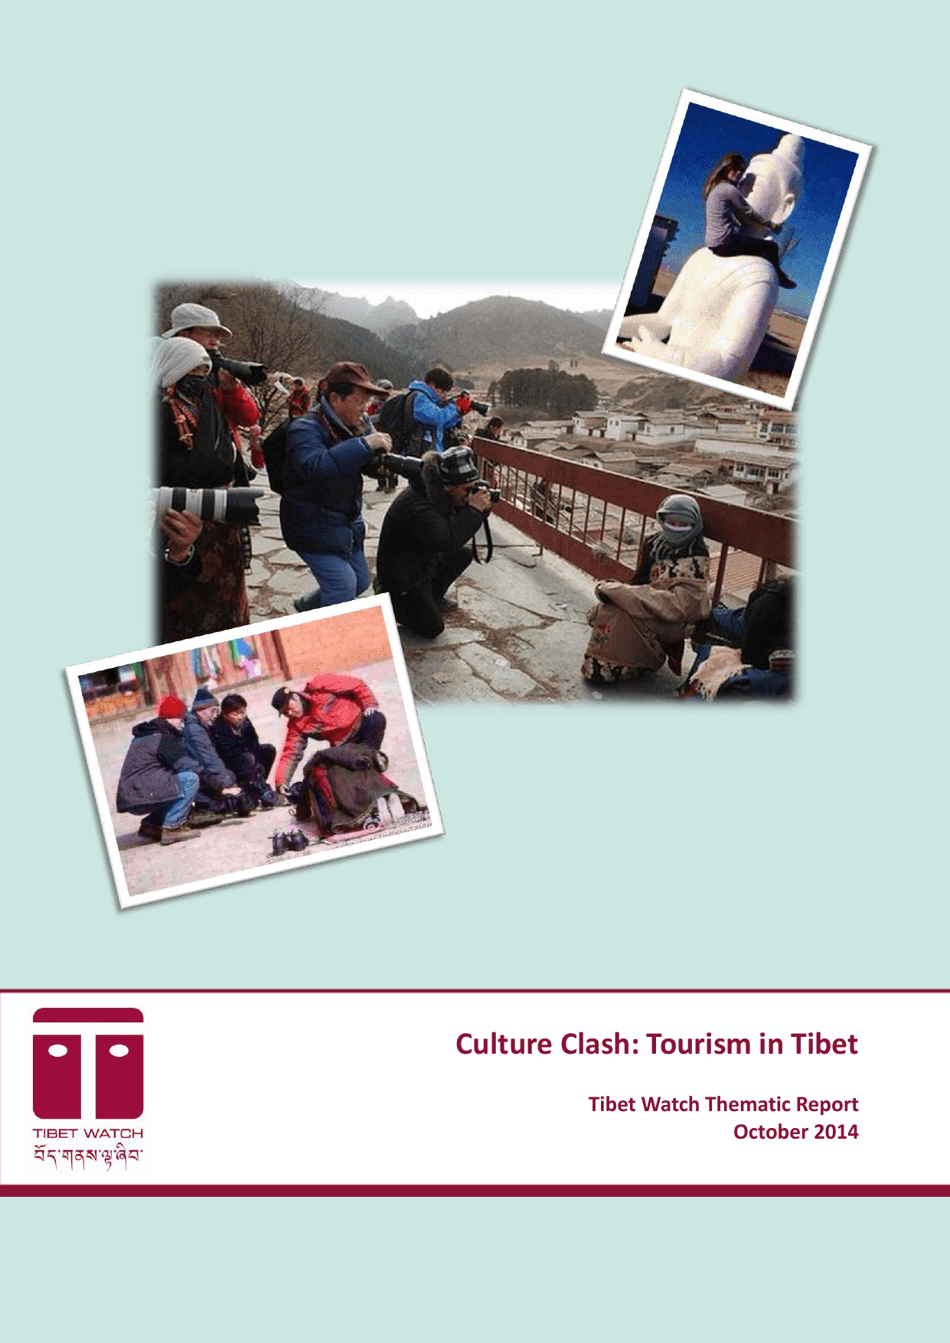 Culture Clash: Tourism in Tibet - Tibet Watch Thematic Report, Page 1